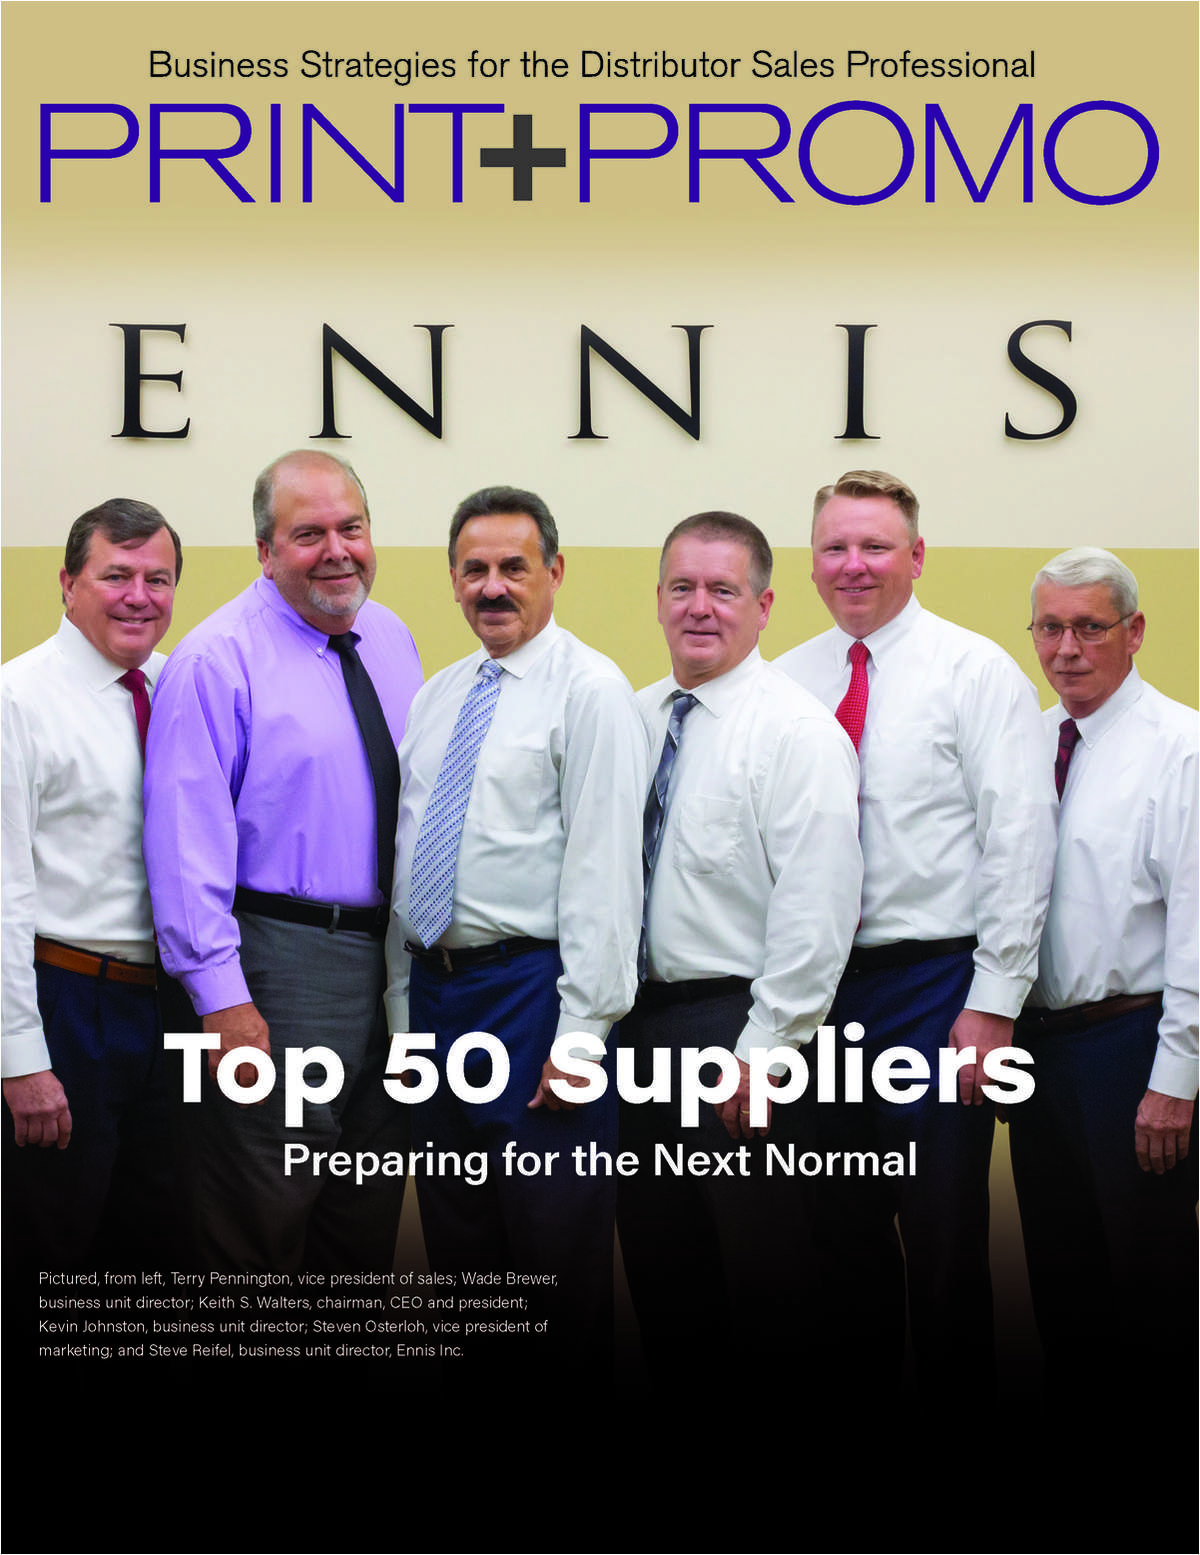 Print+Promo's 2020 Top 50 Suppliers List